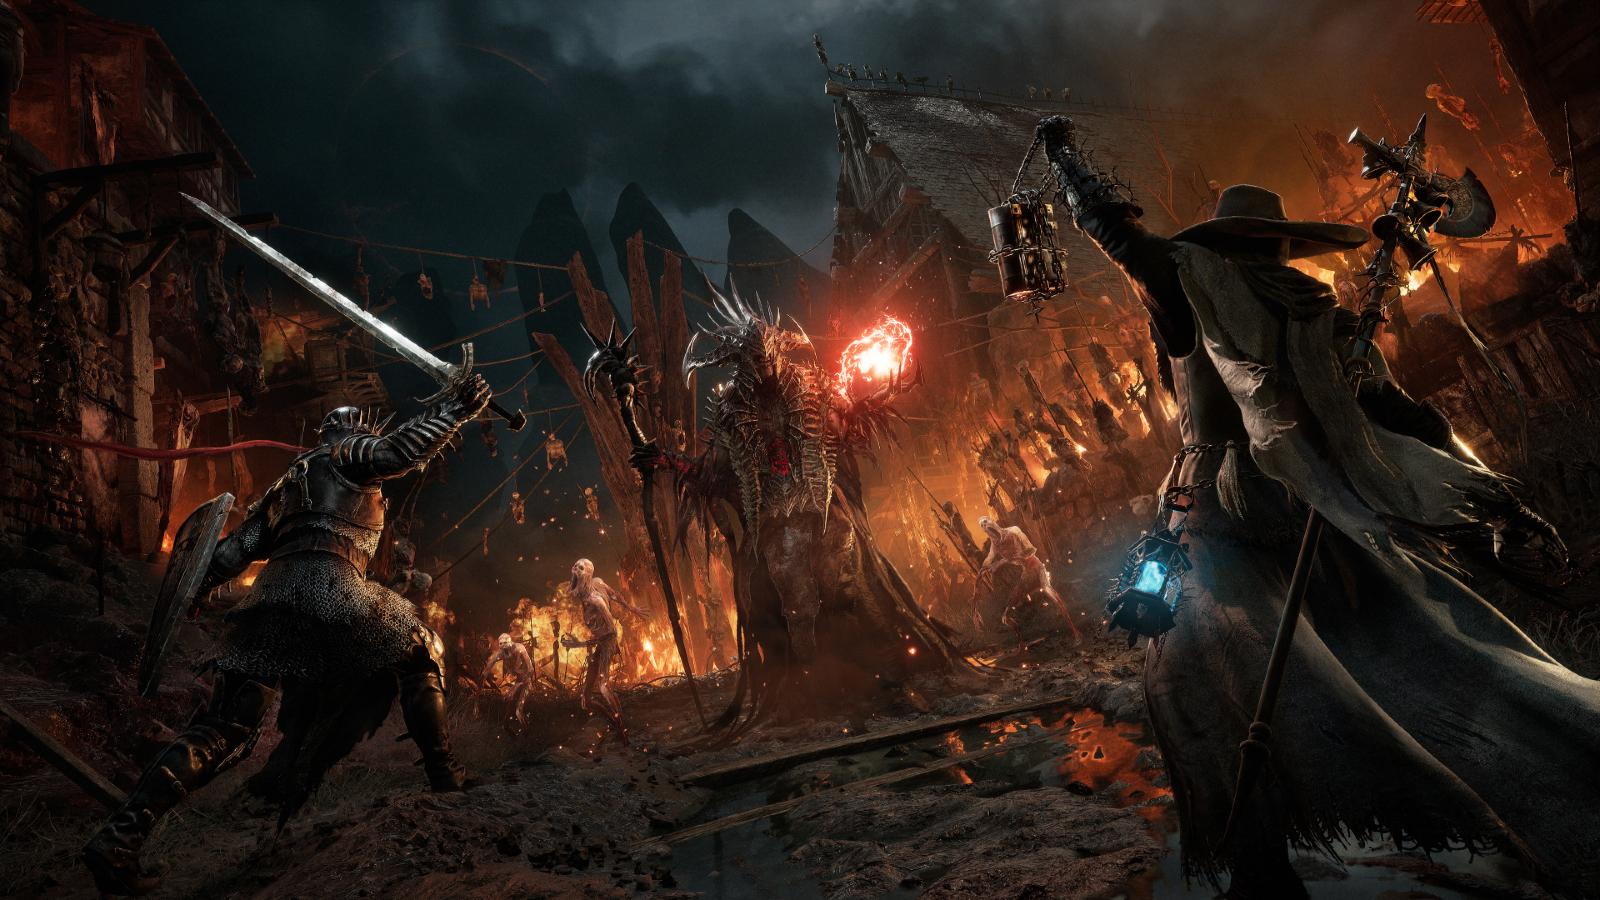 Everything we know about The Lords of the Fallen sequel: Platforms